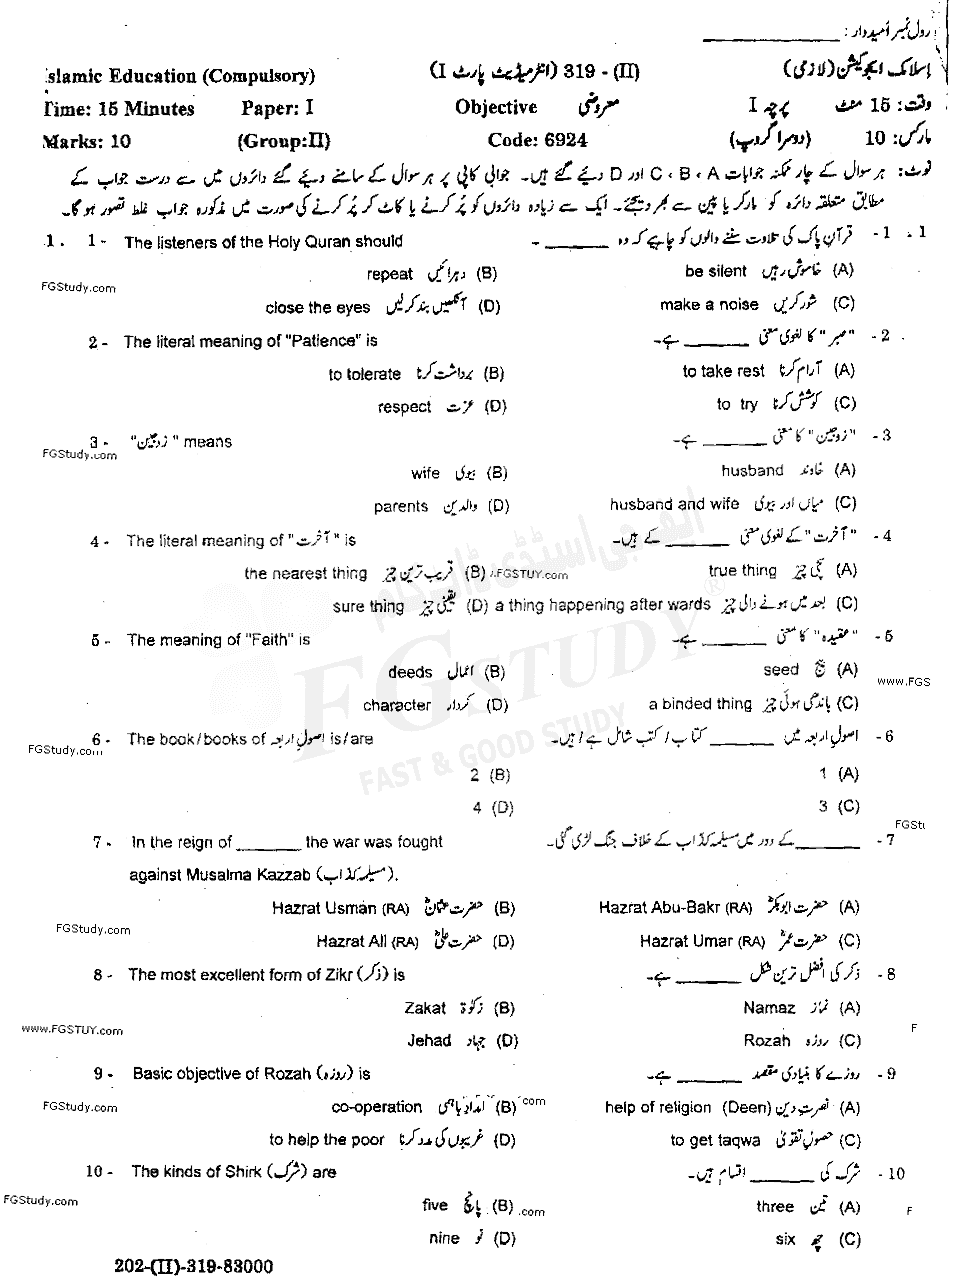 11th Class Islamic Education Past Paper 2019 Gujranwala Board Group 2 Objective